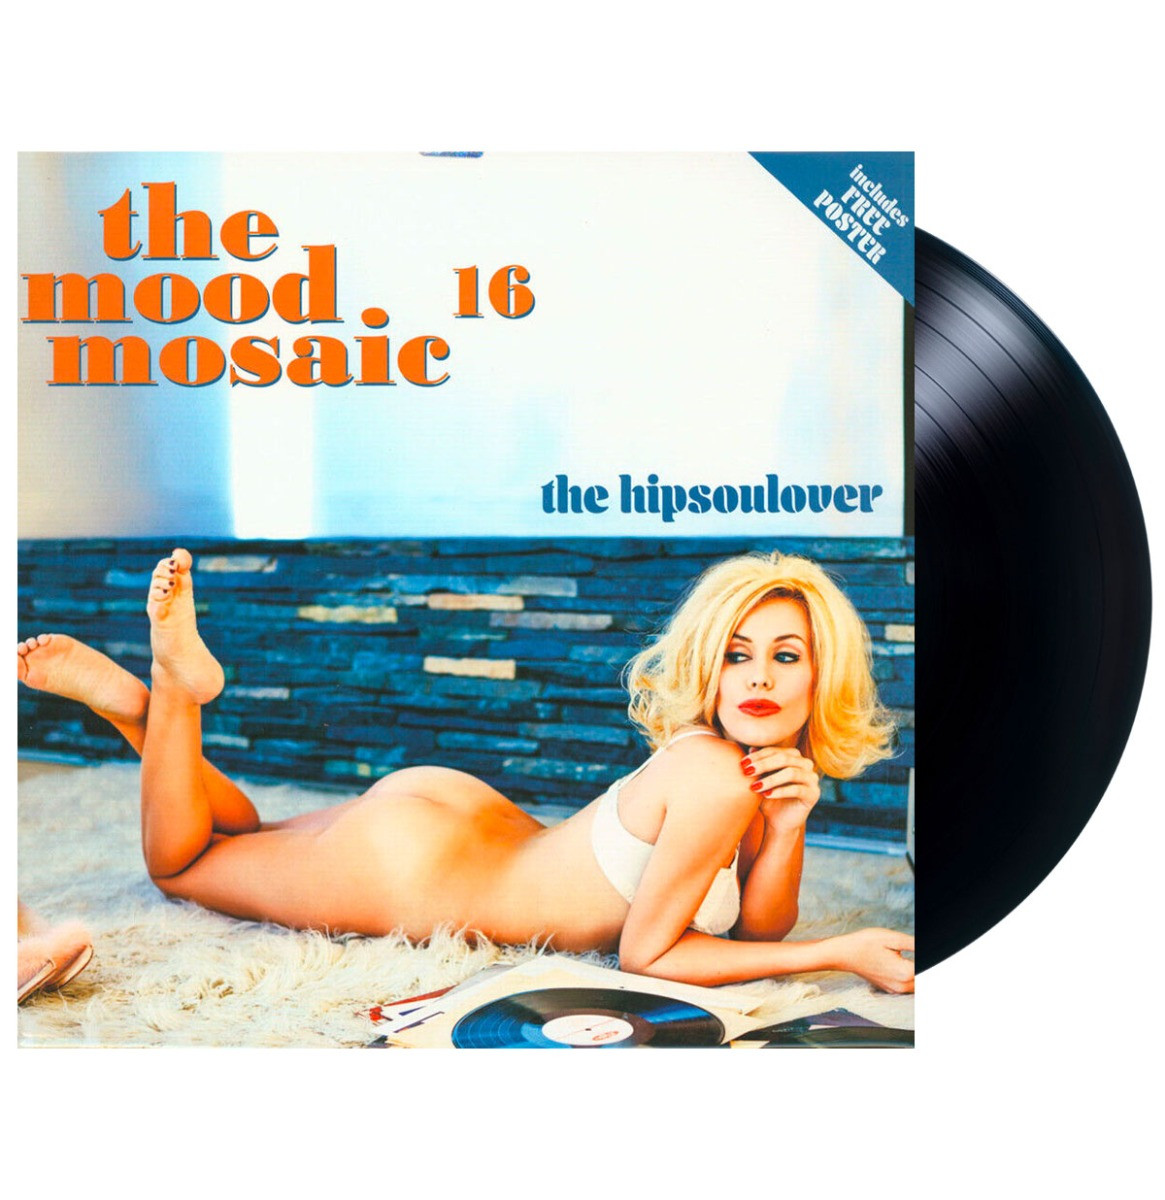 Various Artists - The Mood Mosaic Vol. 16 "The Hipsoulover" LP